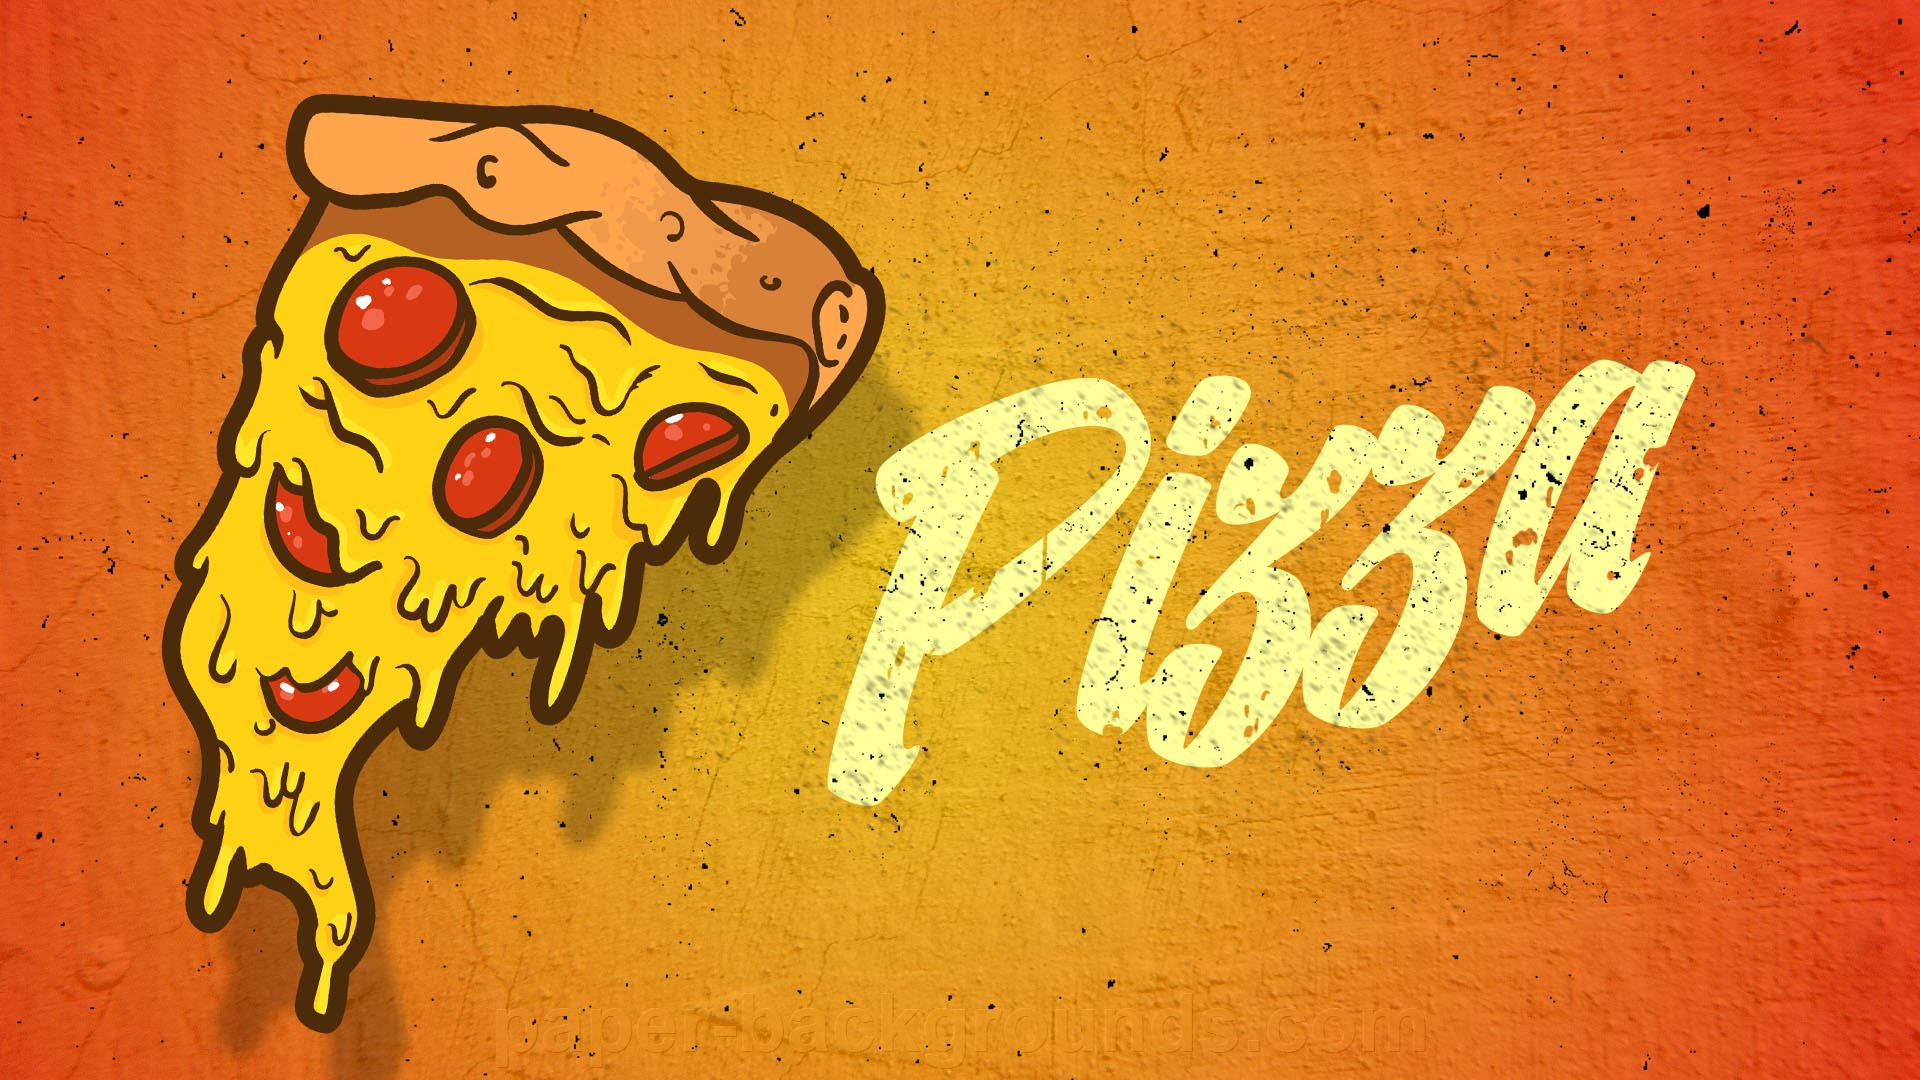 1920X1080 Pizza Wallpaper and Background